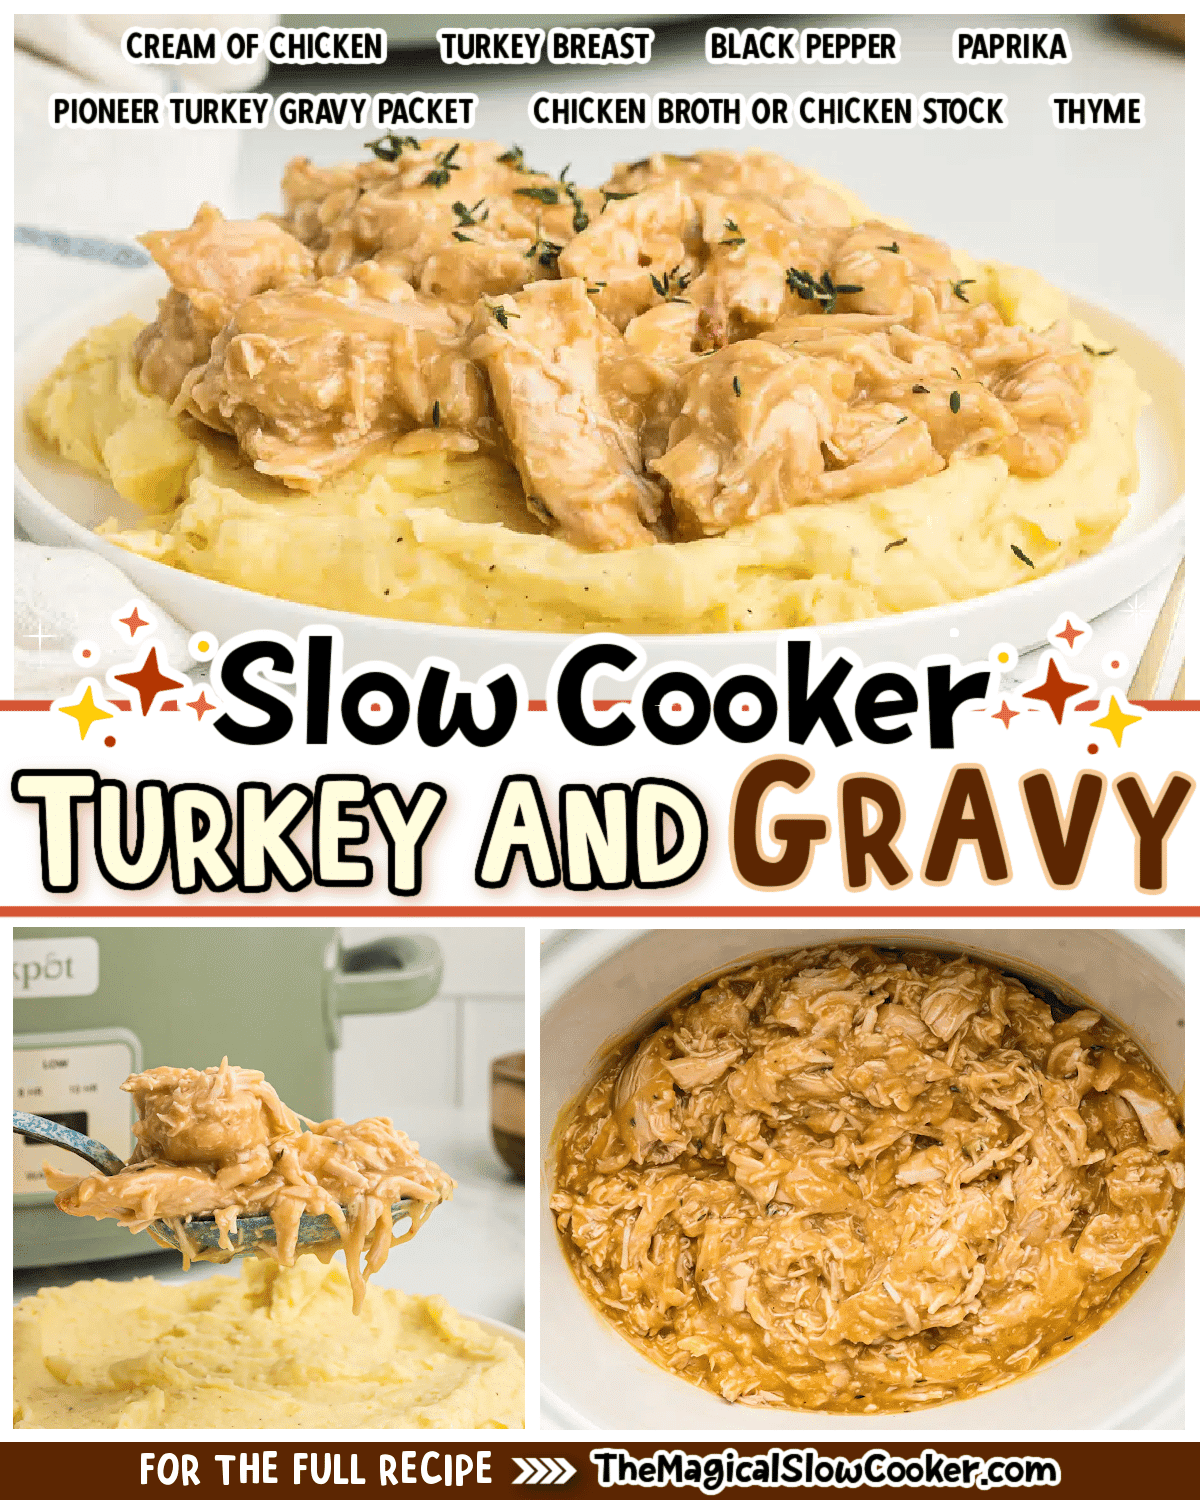 Collage of turkey and gravy with text of what the ingredients are.